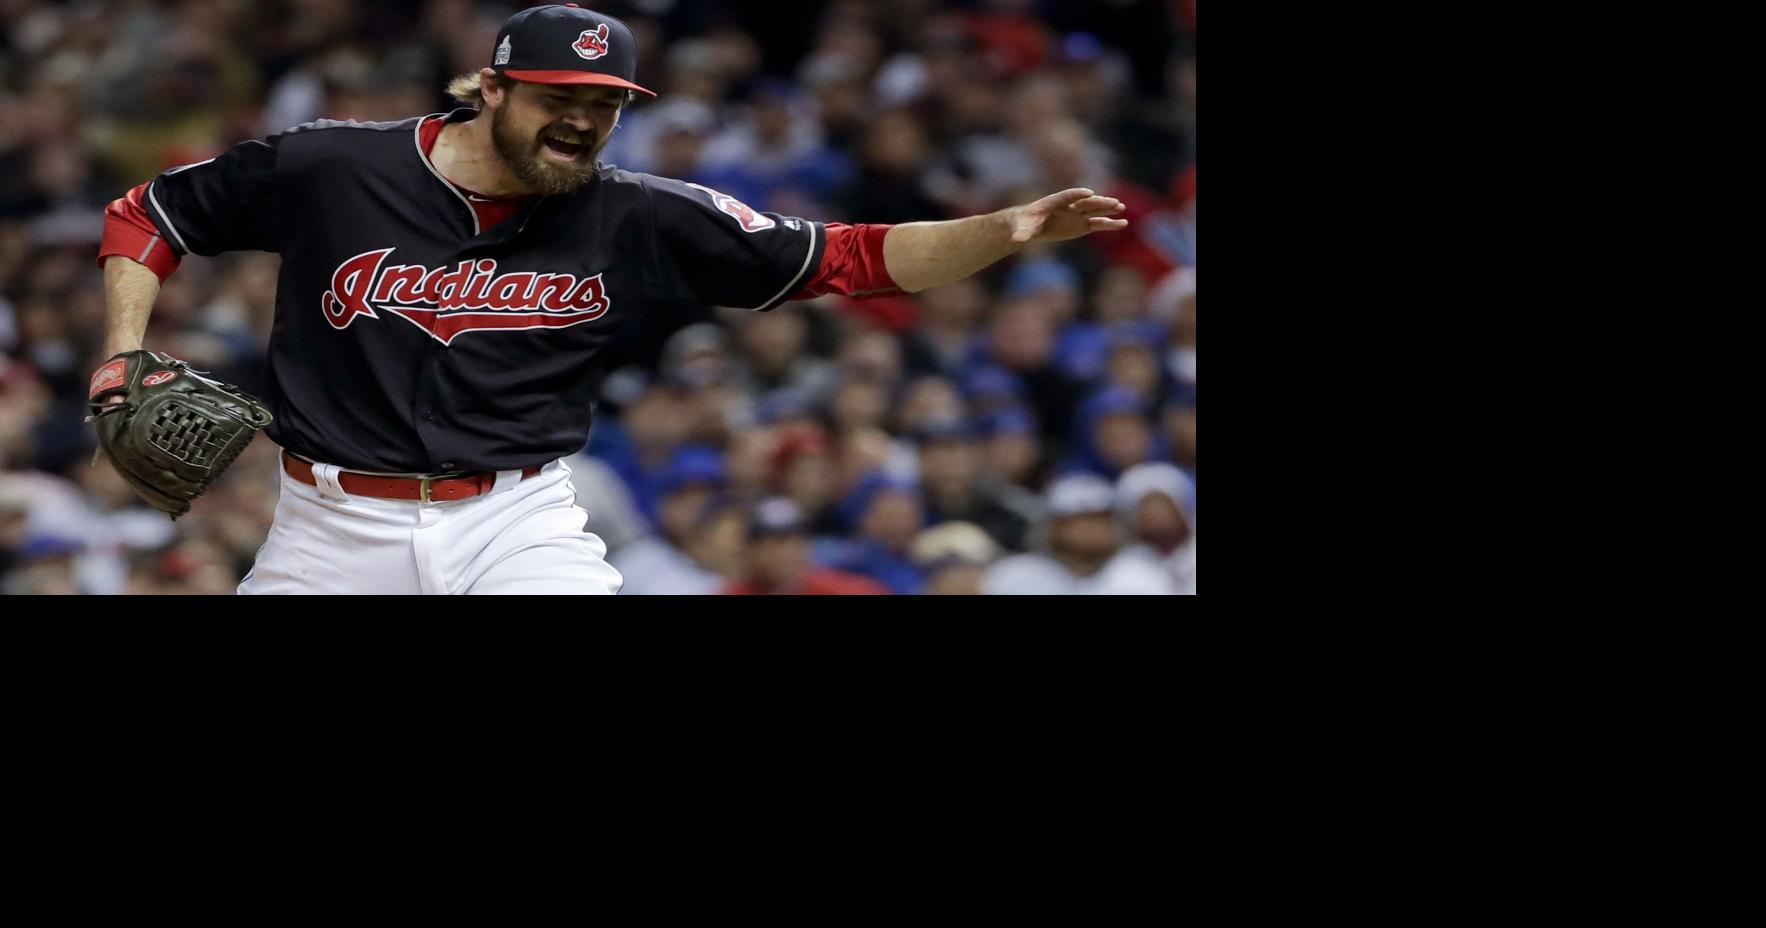 How the Cardinals signed future Cy Young Award winner Chris Carpenter